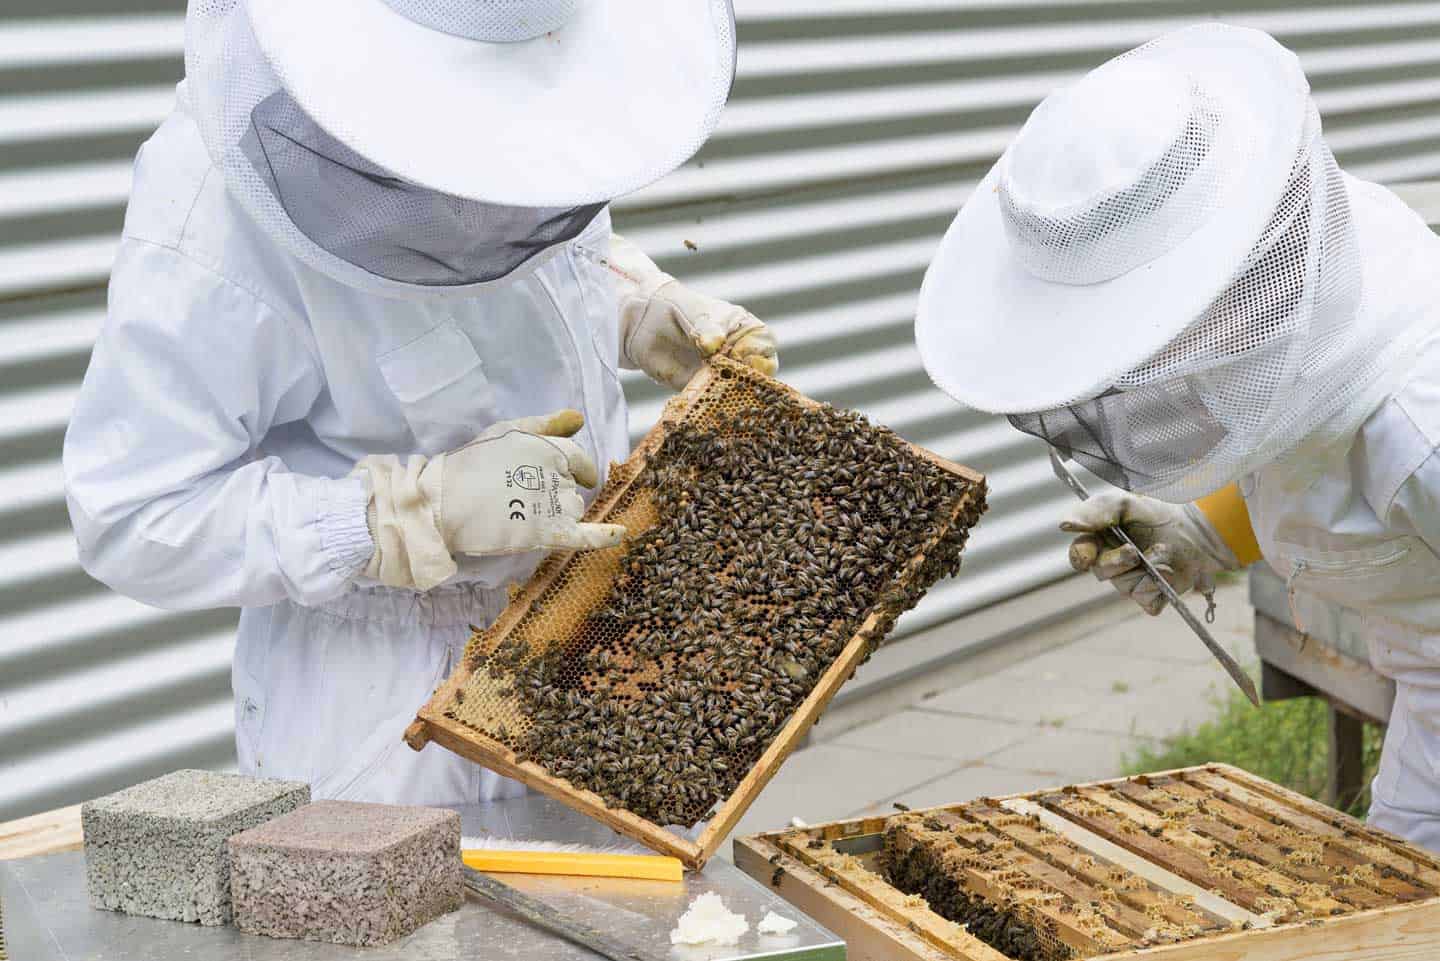 2 beekeepers inspecting hive